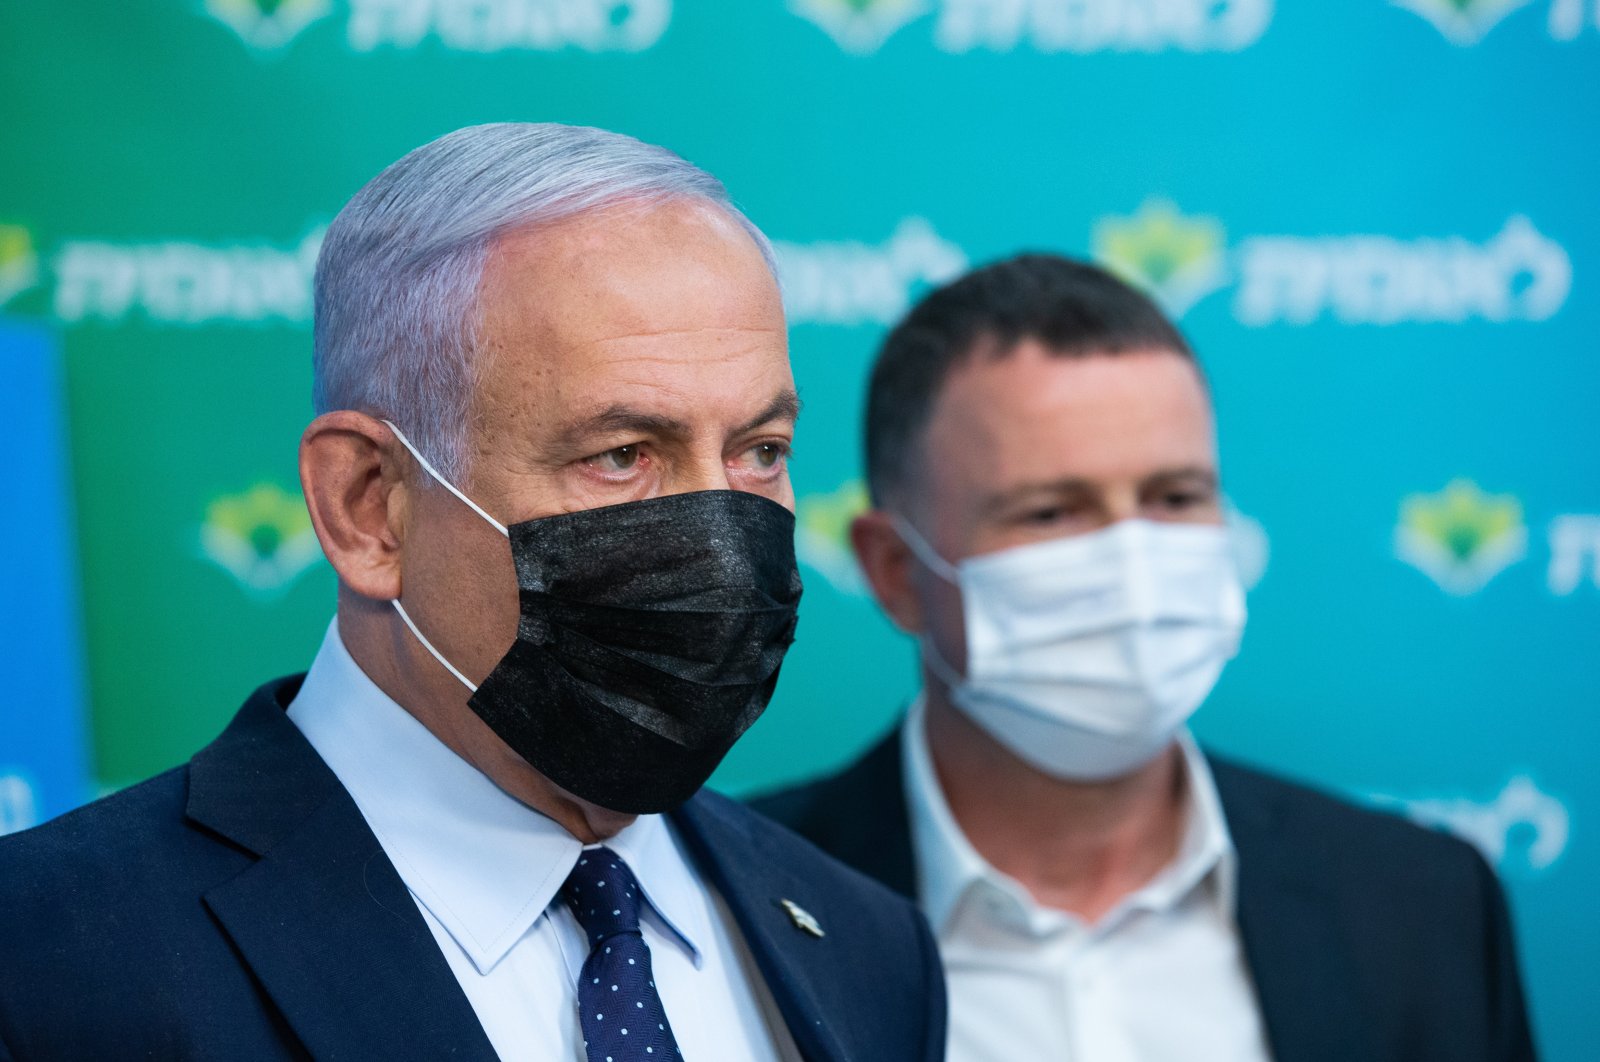 Israeli Prime Minister Benjamin Netanyahu (L) during his visit to the Leumit Health Care Services vaccination facility in Jerusalem, Israel, Feb. 16, 2021. (EPA-EFE Photo)